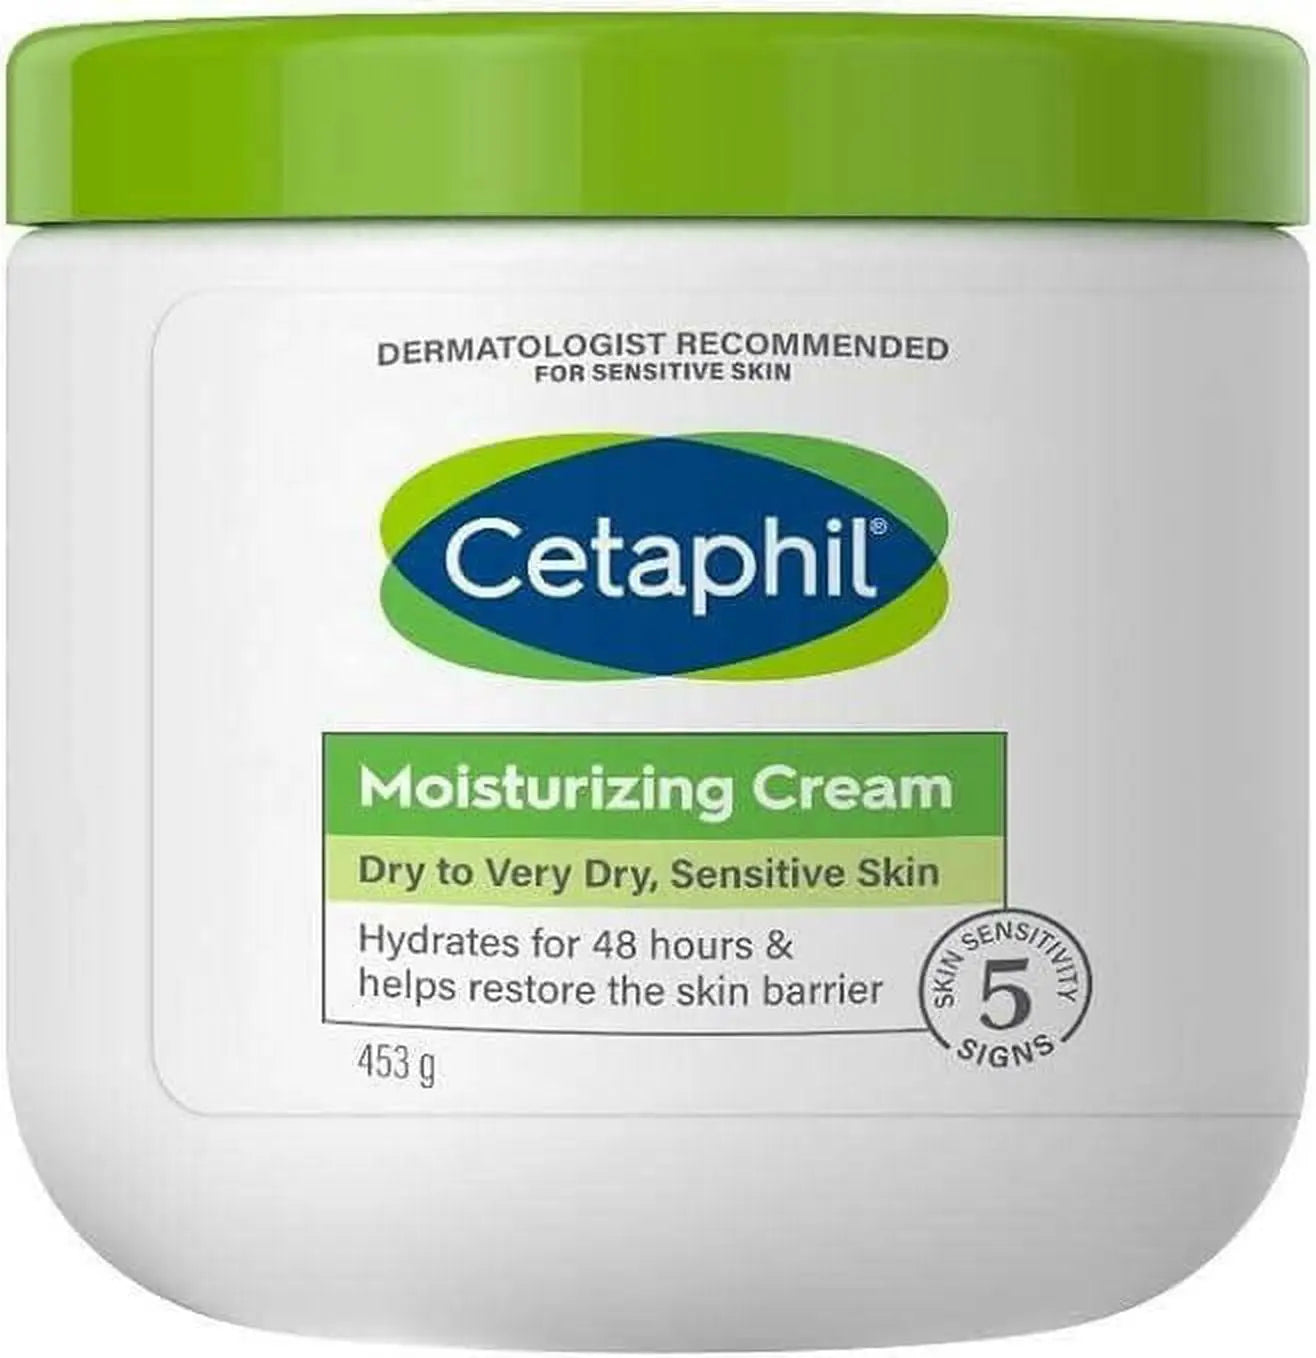 Cetaphil Moisturizing Cream, Face & Body Moisturizer for Men & Women, Dry to Very Dry and Sensitive Skin, Unscented, 453g